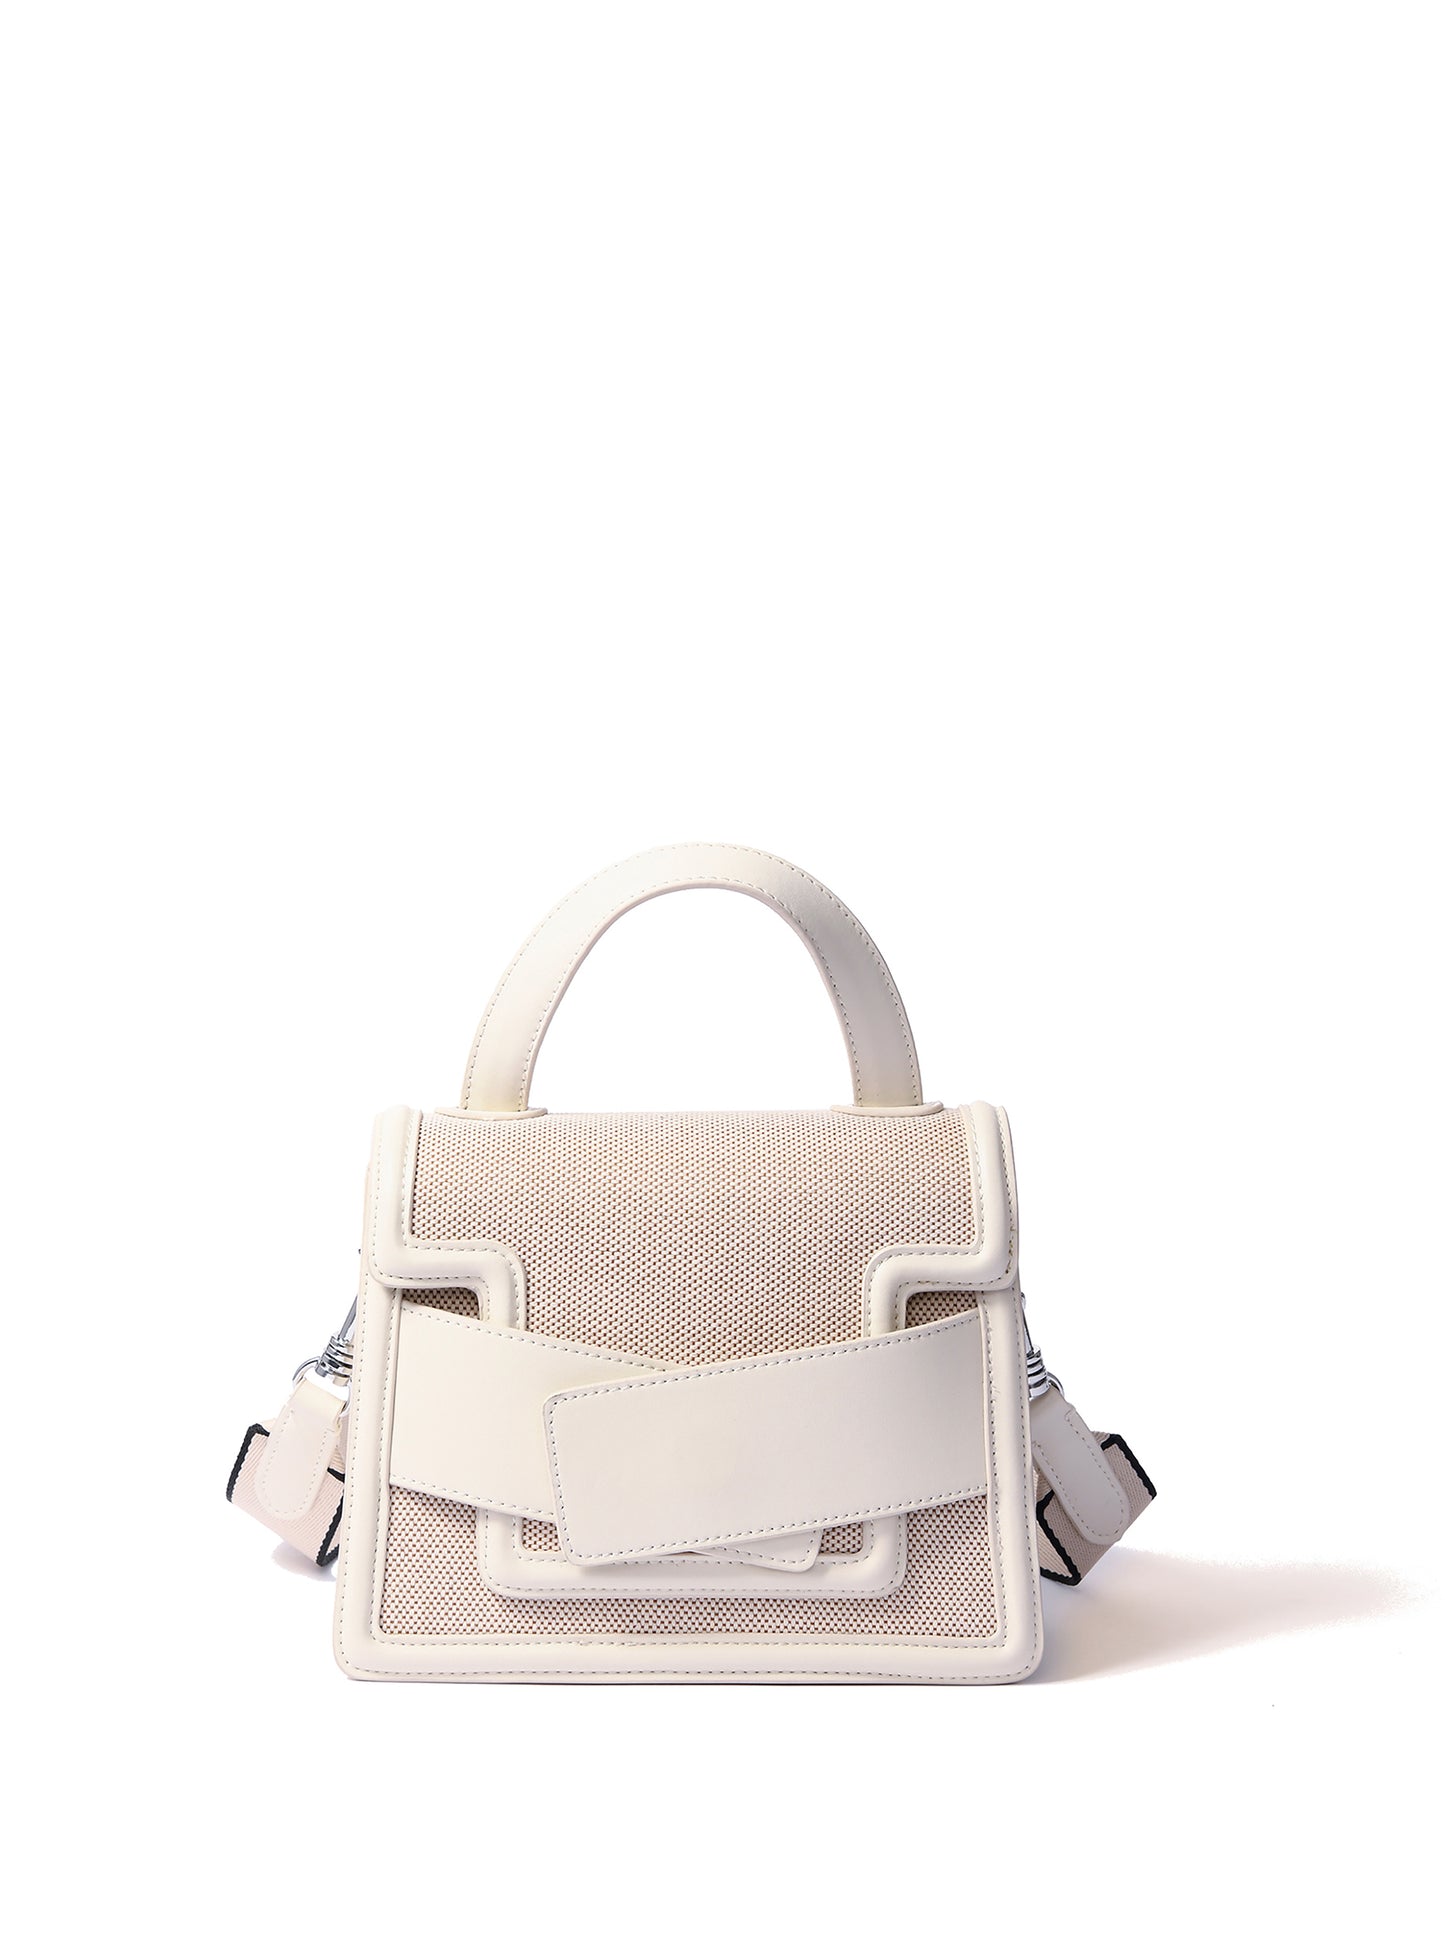 Evelyn Bag in Canvas and Genuine Leather, White